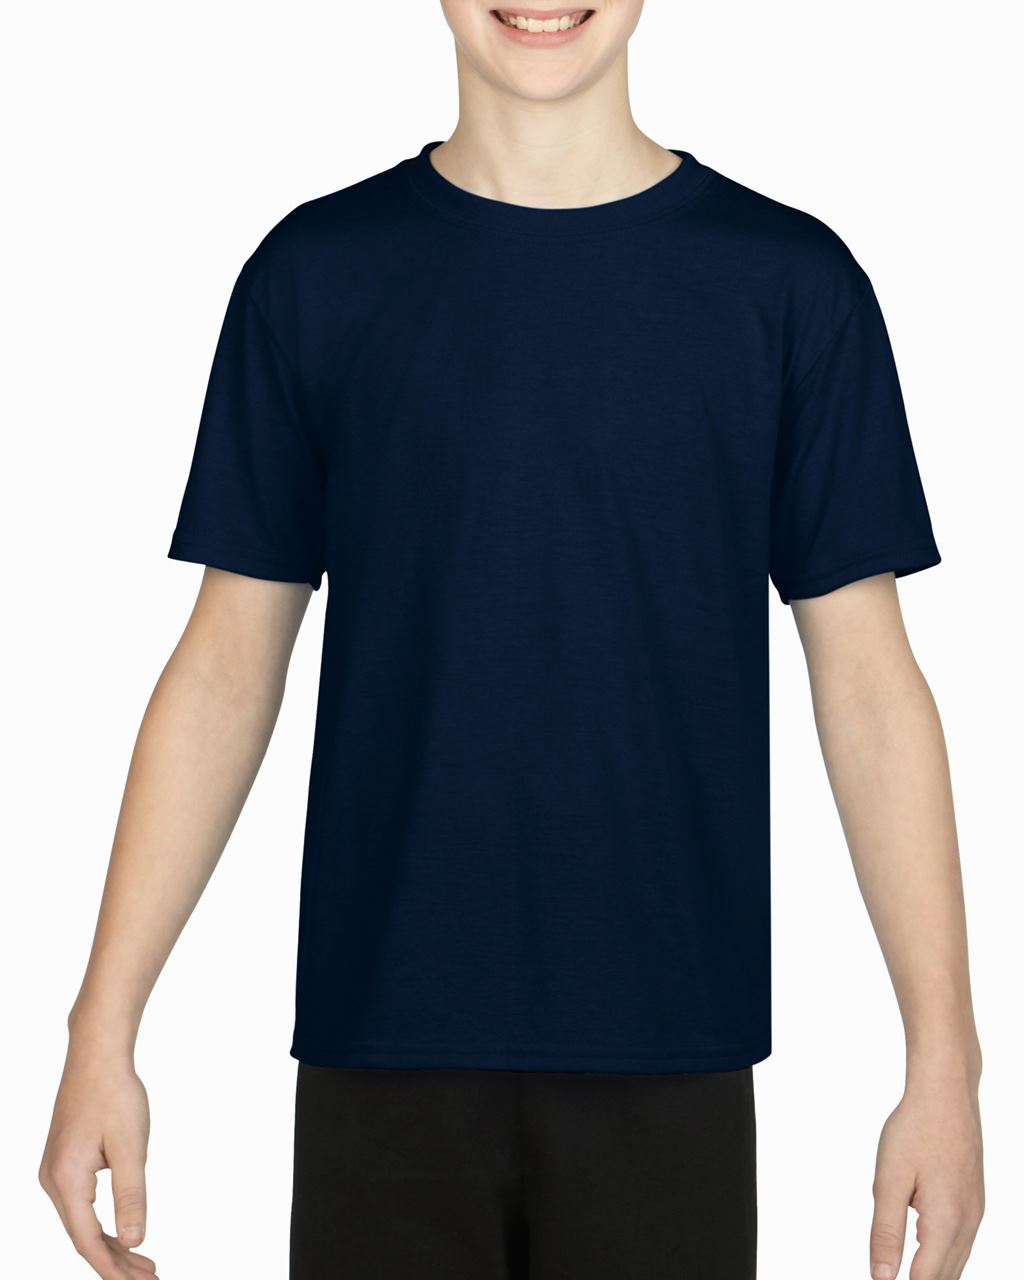 Promo  PERFORMANCE® YOUTH T-SHIRT